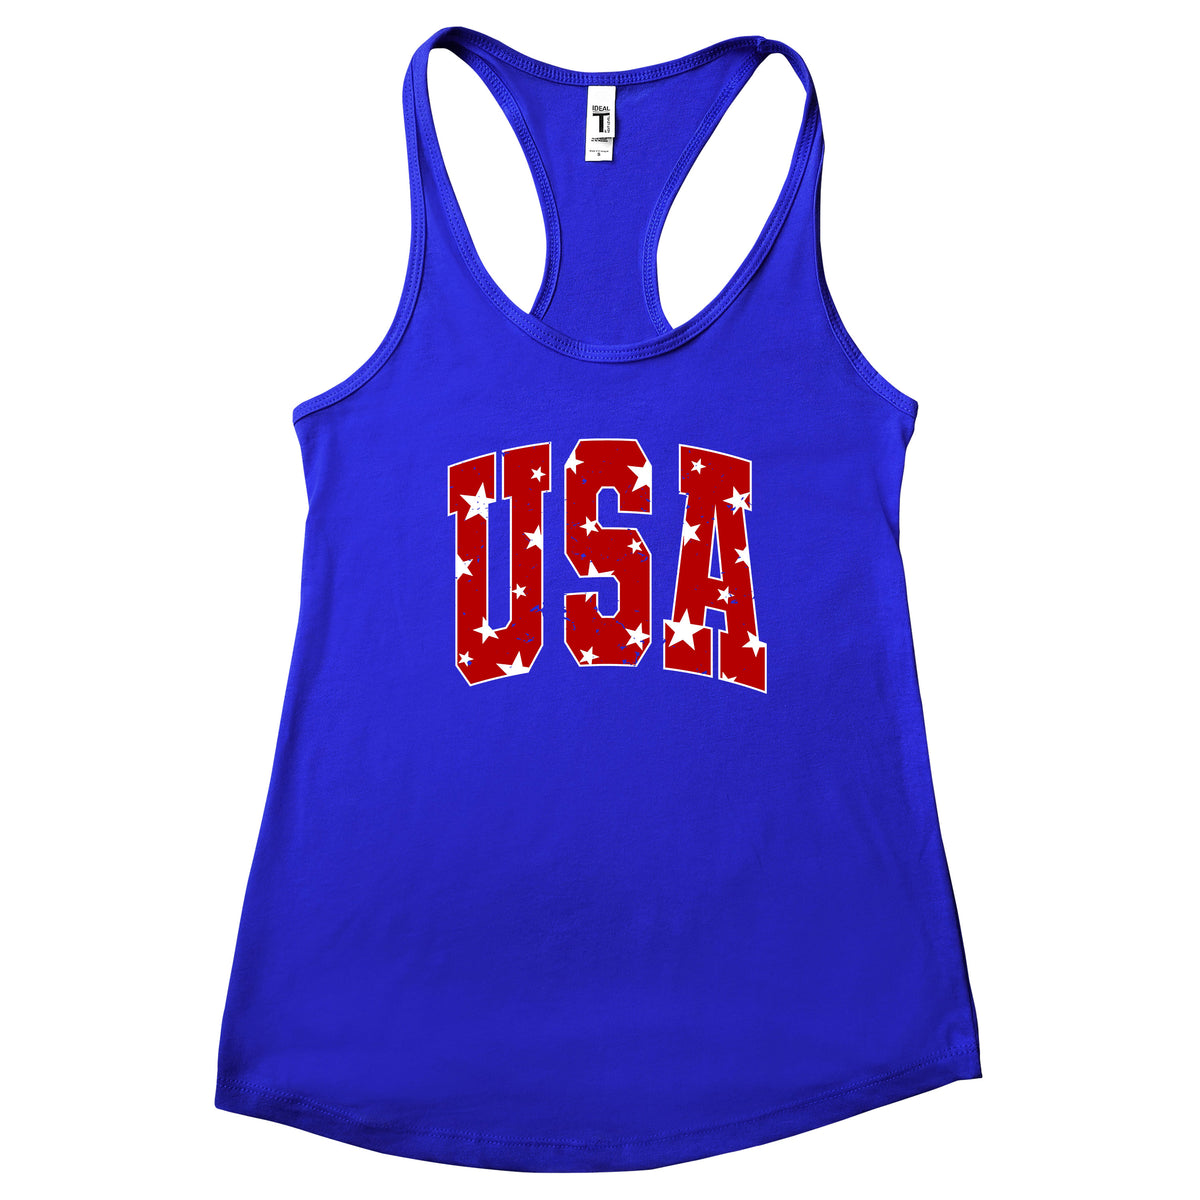 Distressed USA with Stars Tank Top